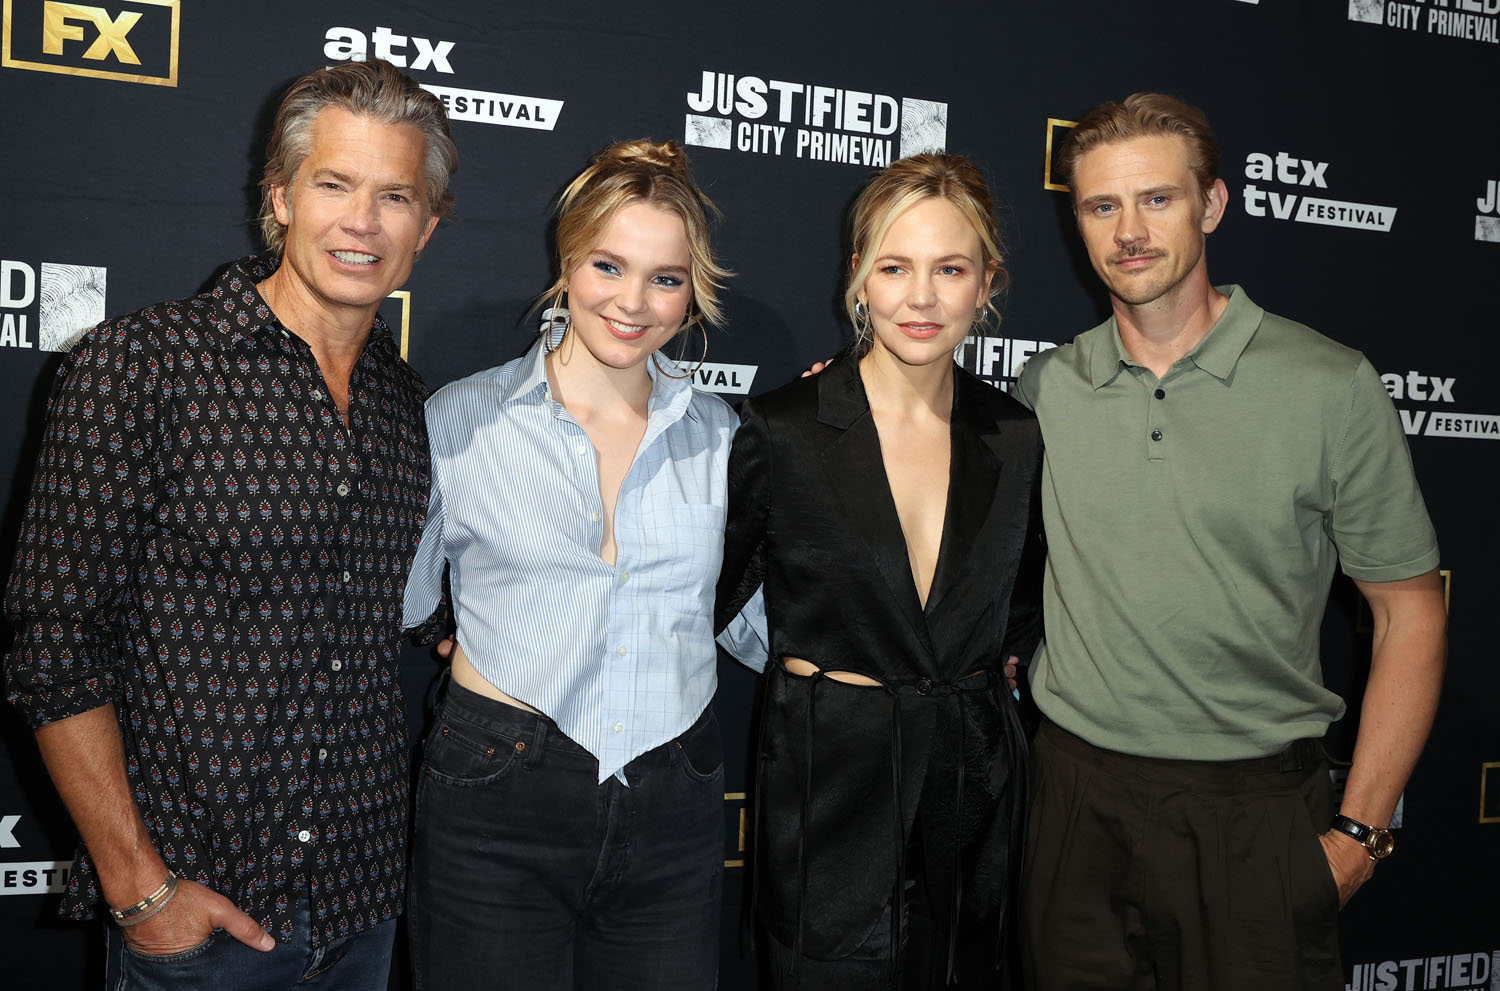 Timothy Olyphant and Boyd Holbrook attend the ATX TV Festival following